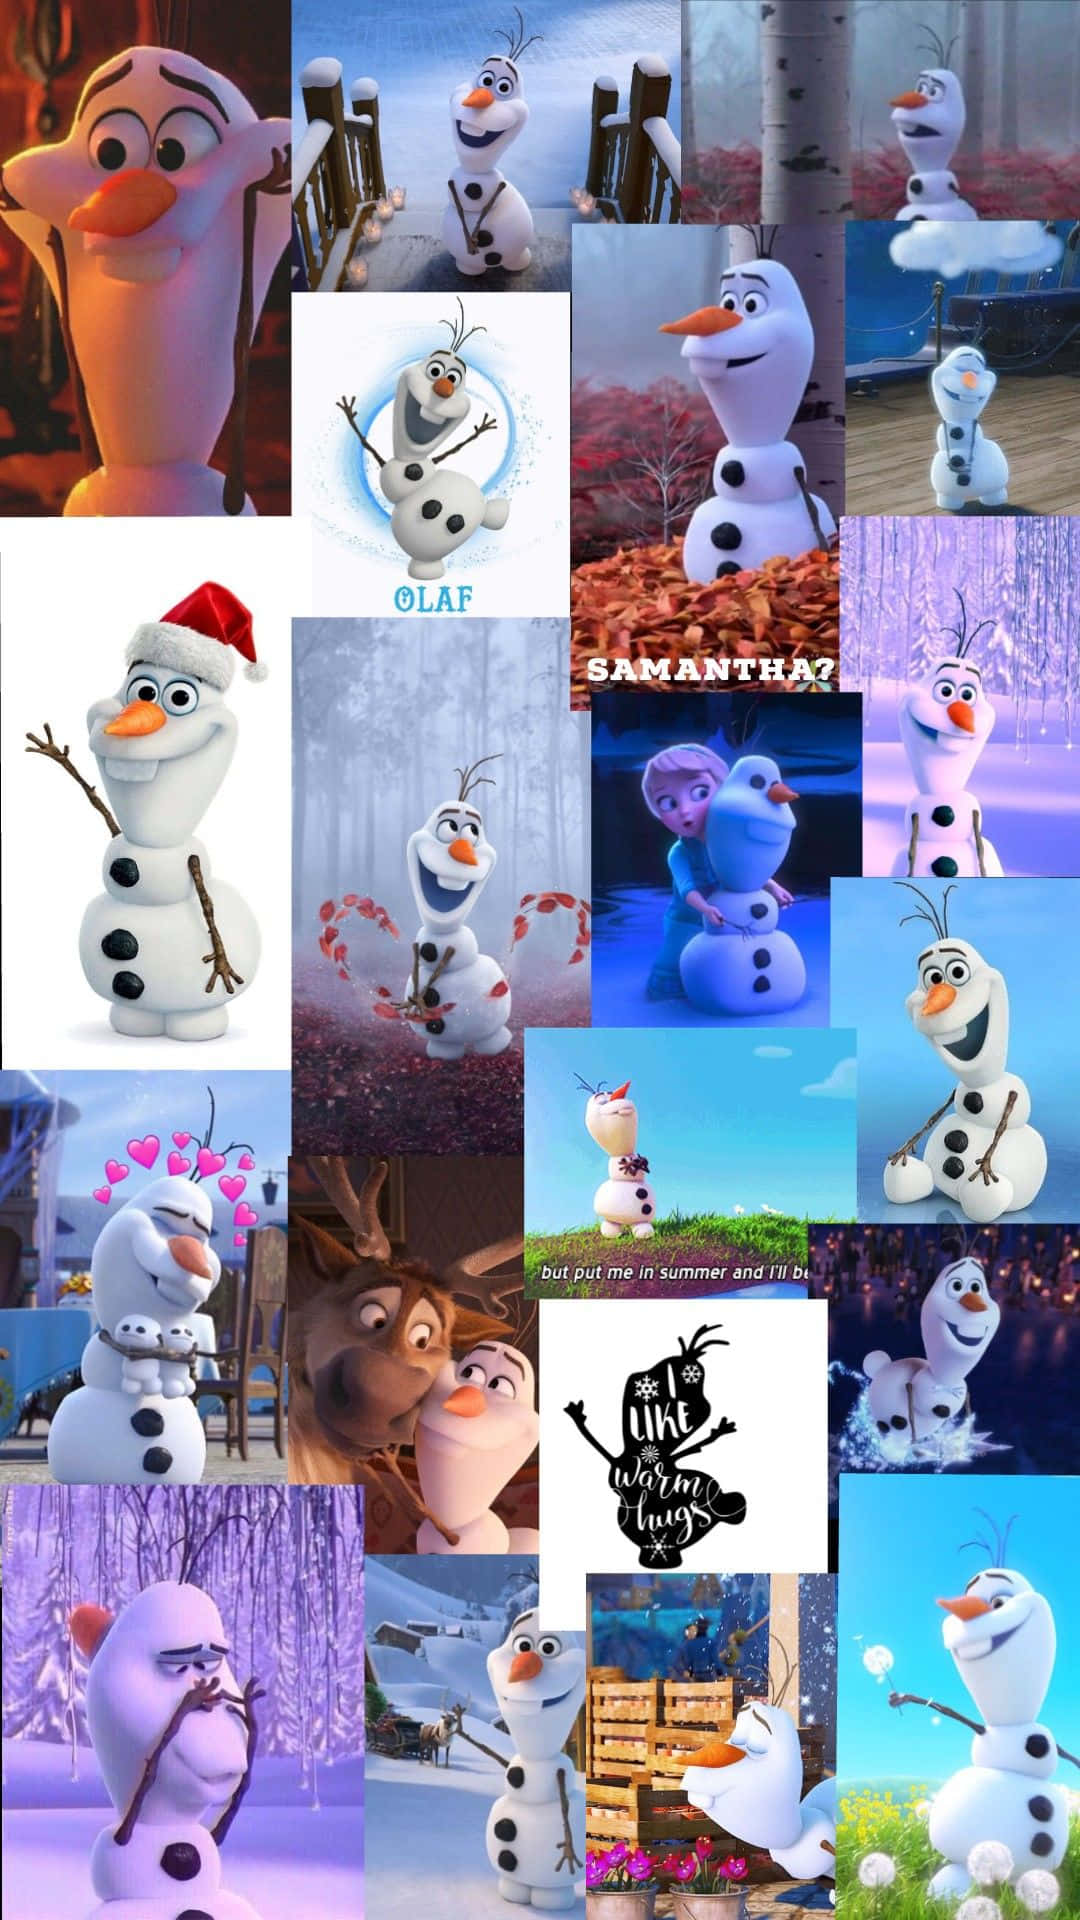 70 Olaf Frozen HD Wallpapers and Backgrounds